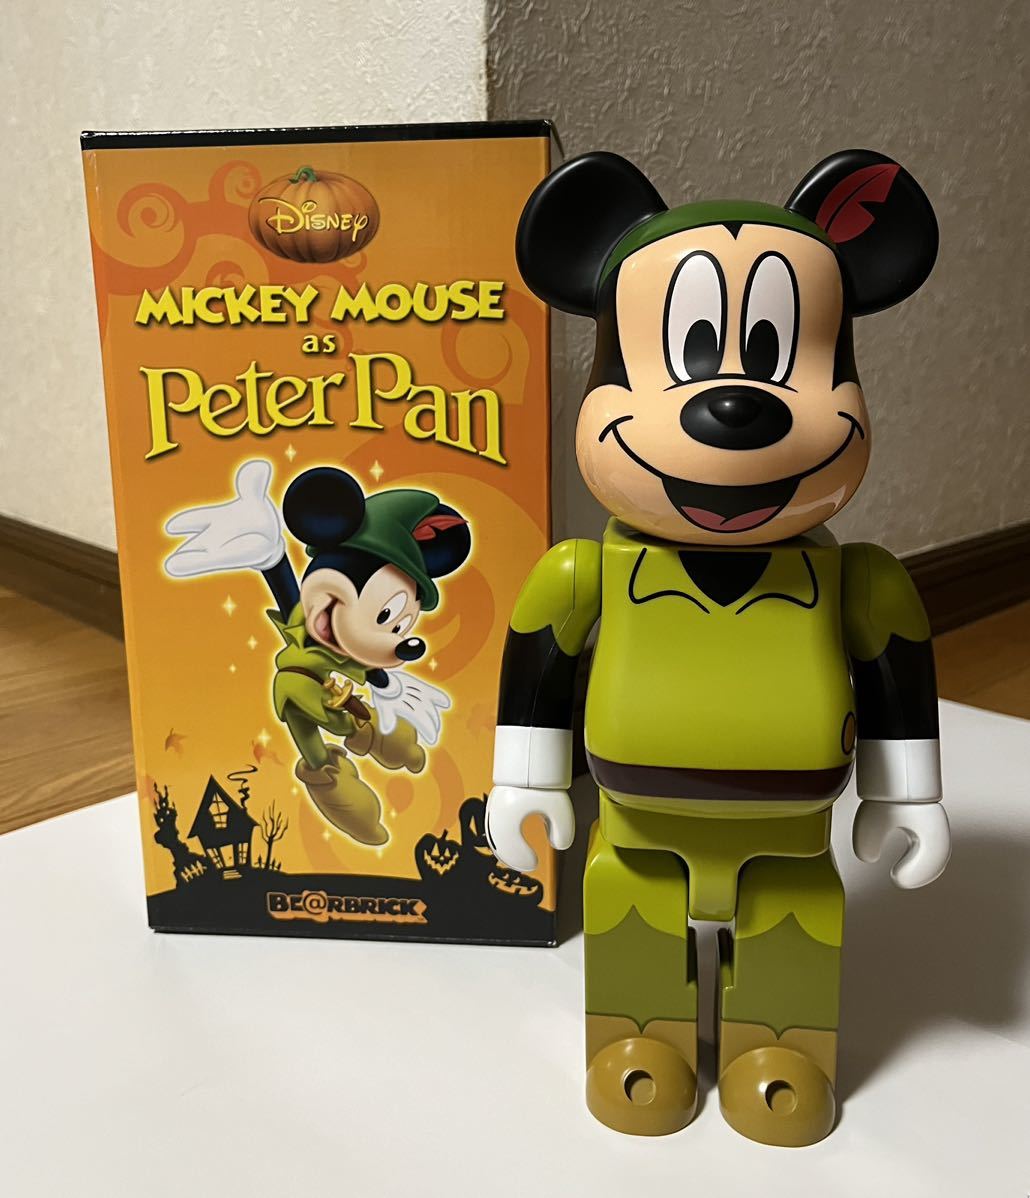 '09 BE@RBRICK MICKEY MOUSE as PETER PAN 400% / セブンイレブン限定 ミッキーマウス ピーターパン バージョン ベアブリック